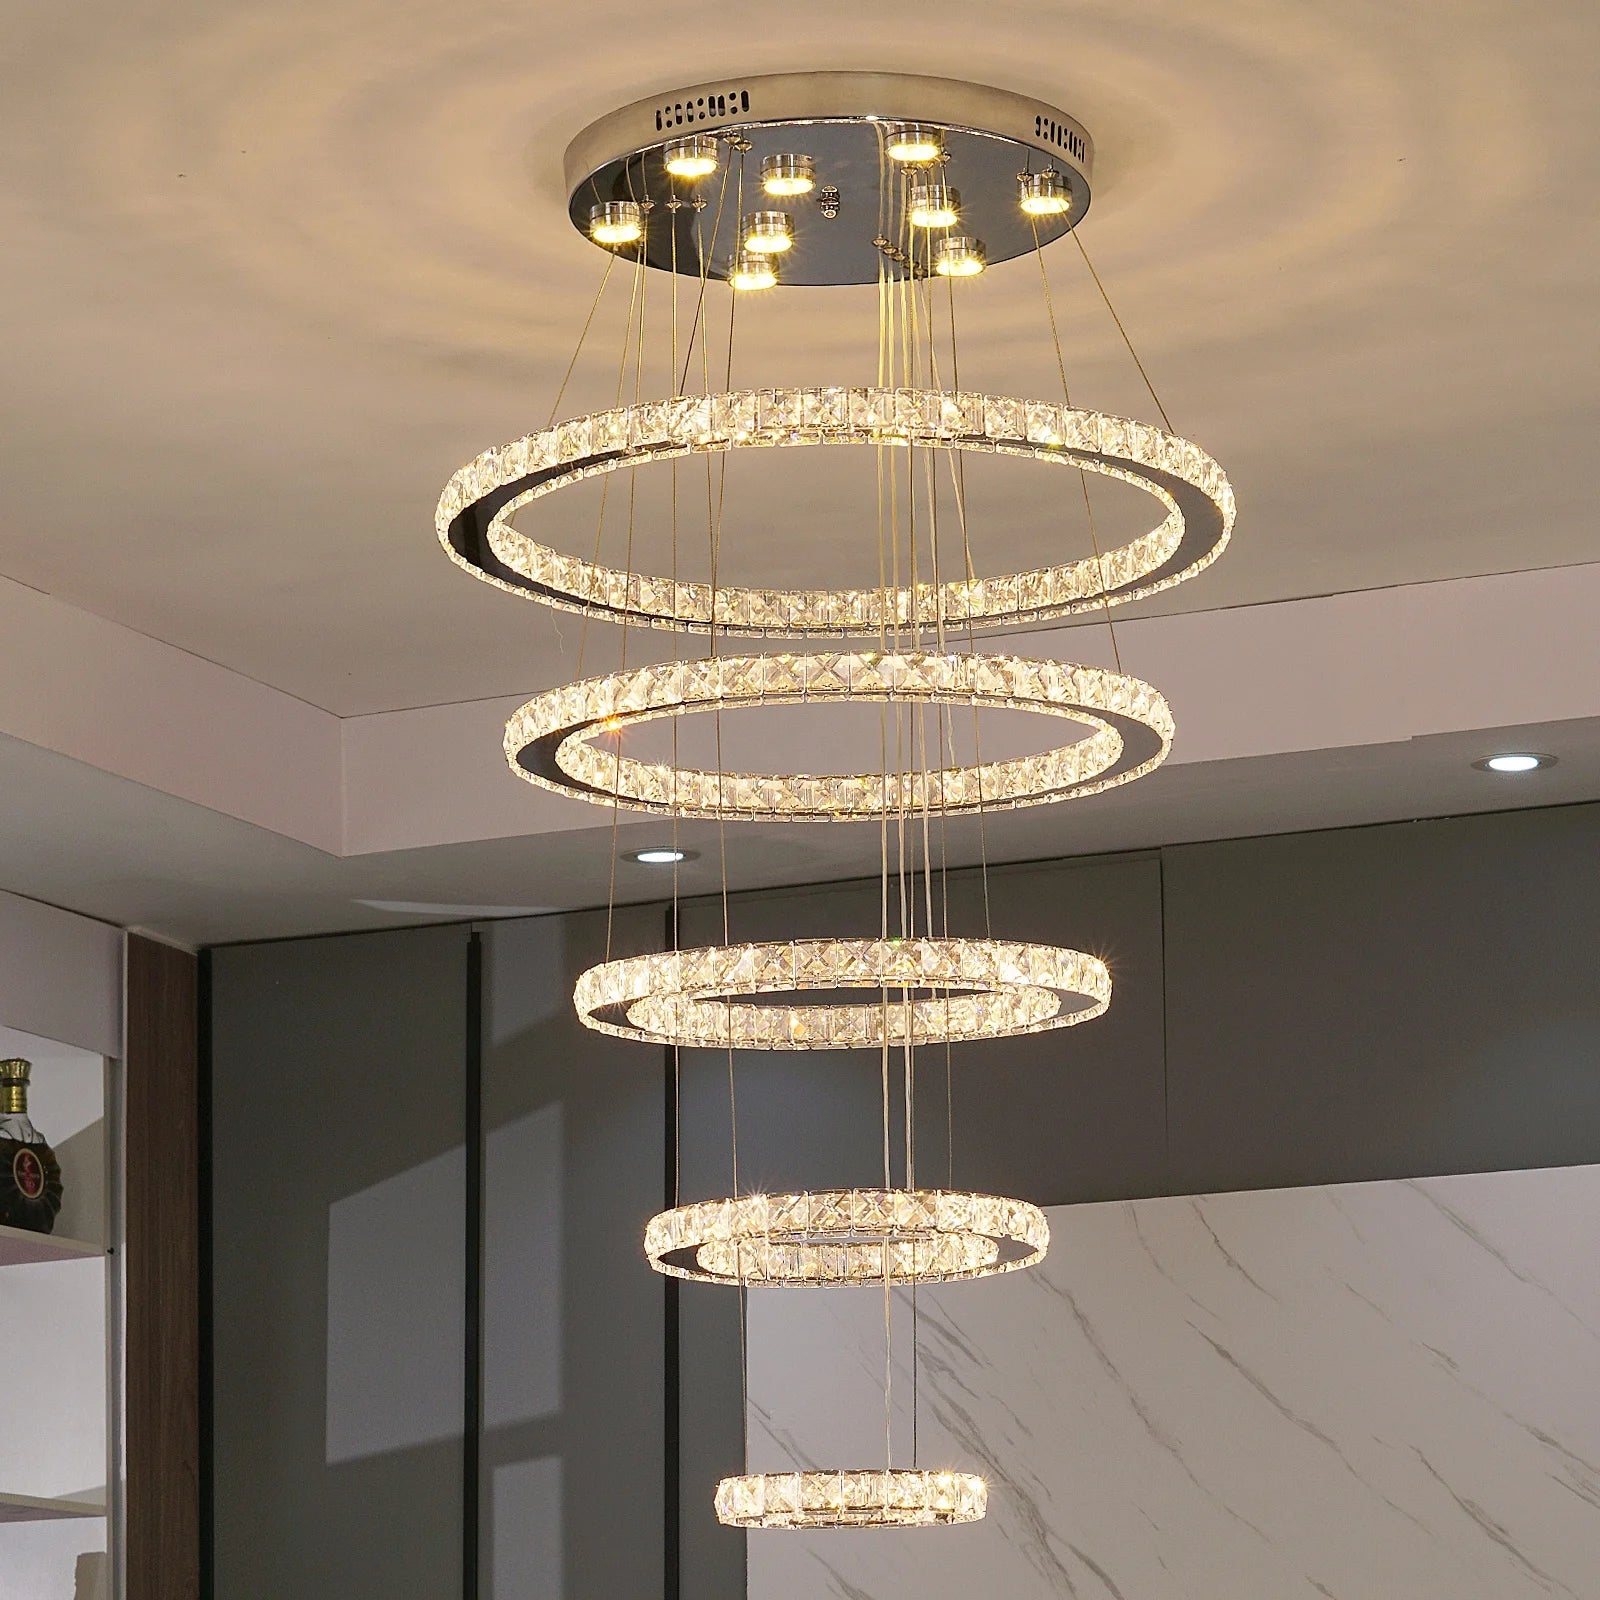 2M Long Stairwell Chandeliers For High Ceiling